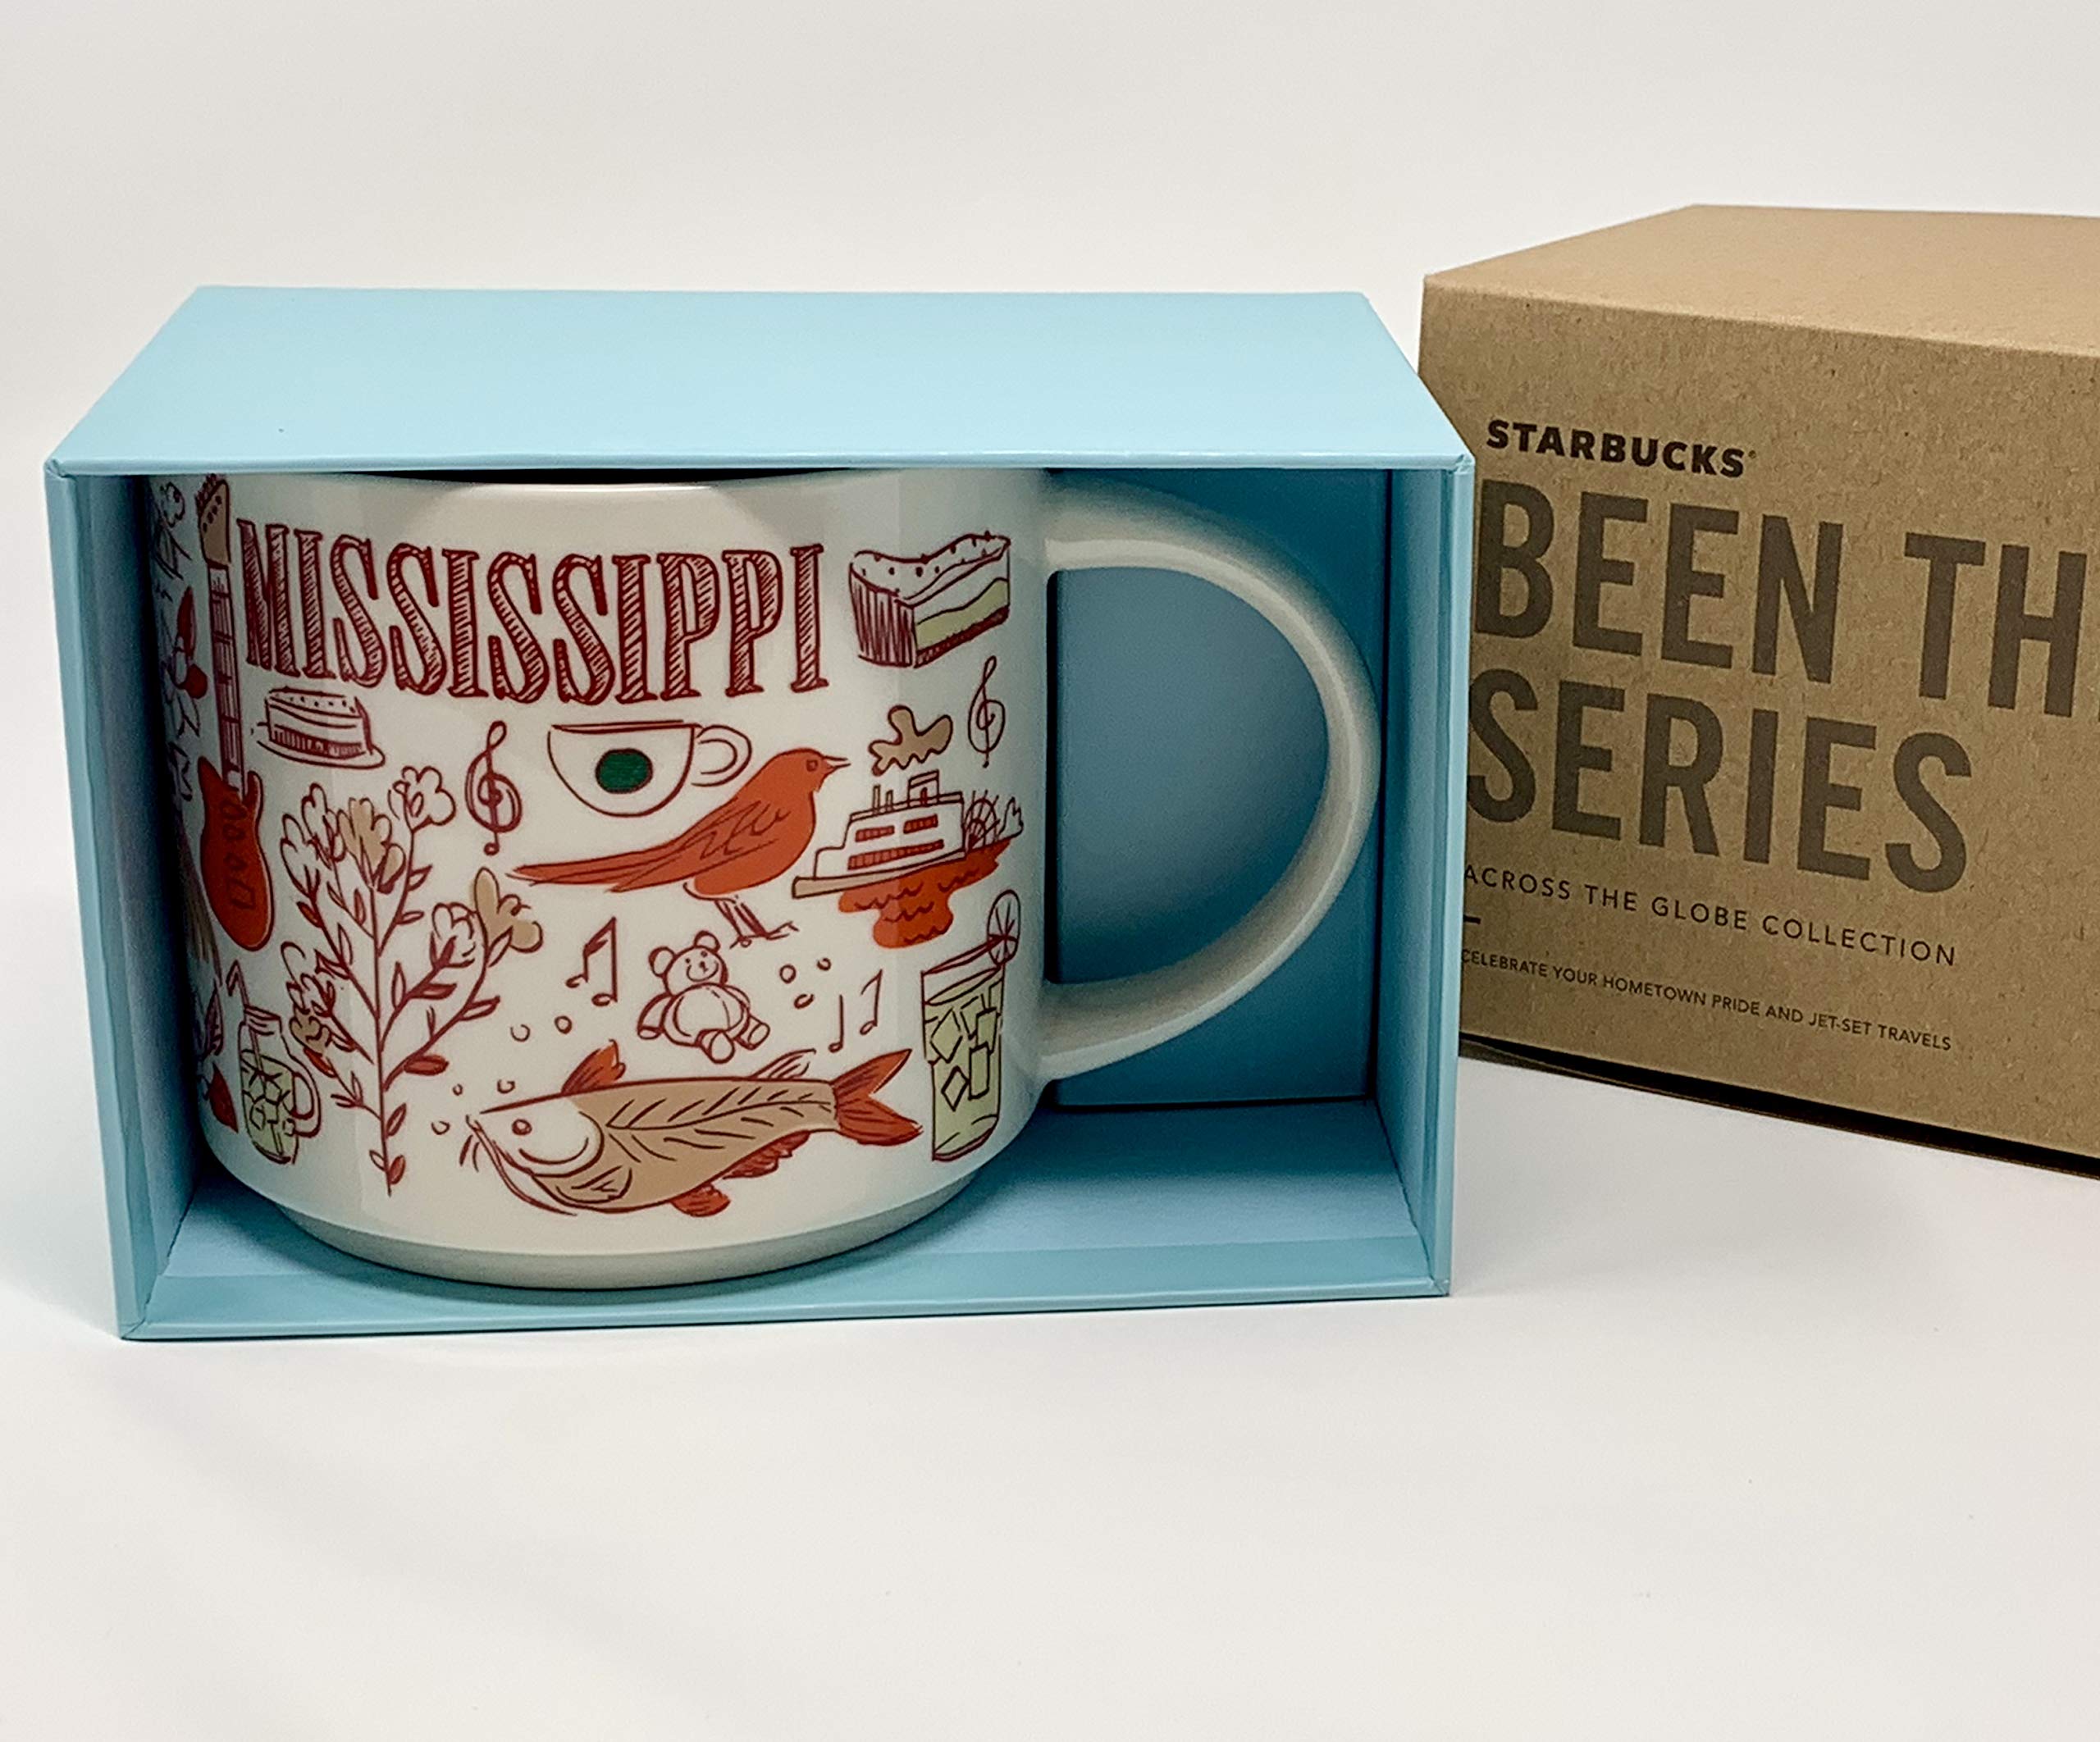 Starbucks MISSISSIPPI BEEN THERE SERIES ACROSS THE GLOBE COLLECTION Ceramic Coffee Mug